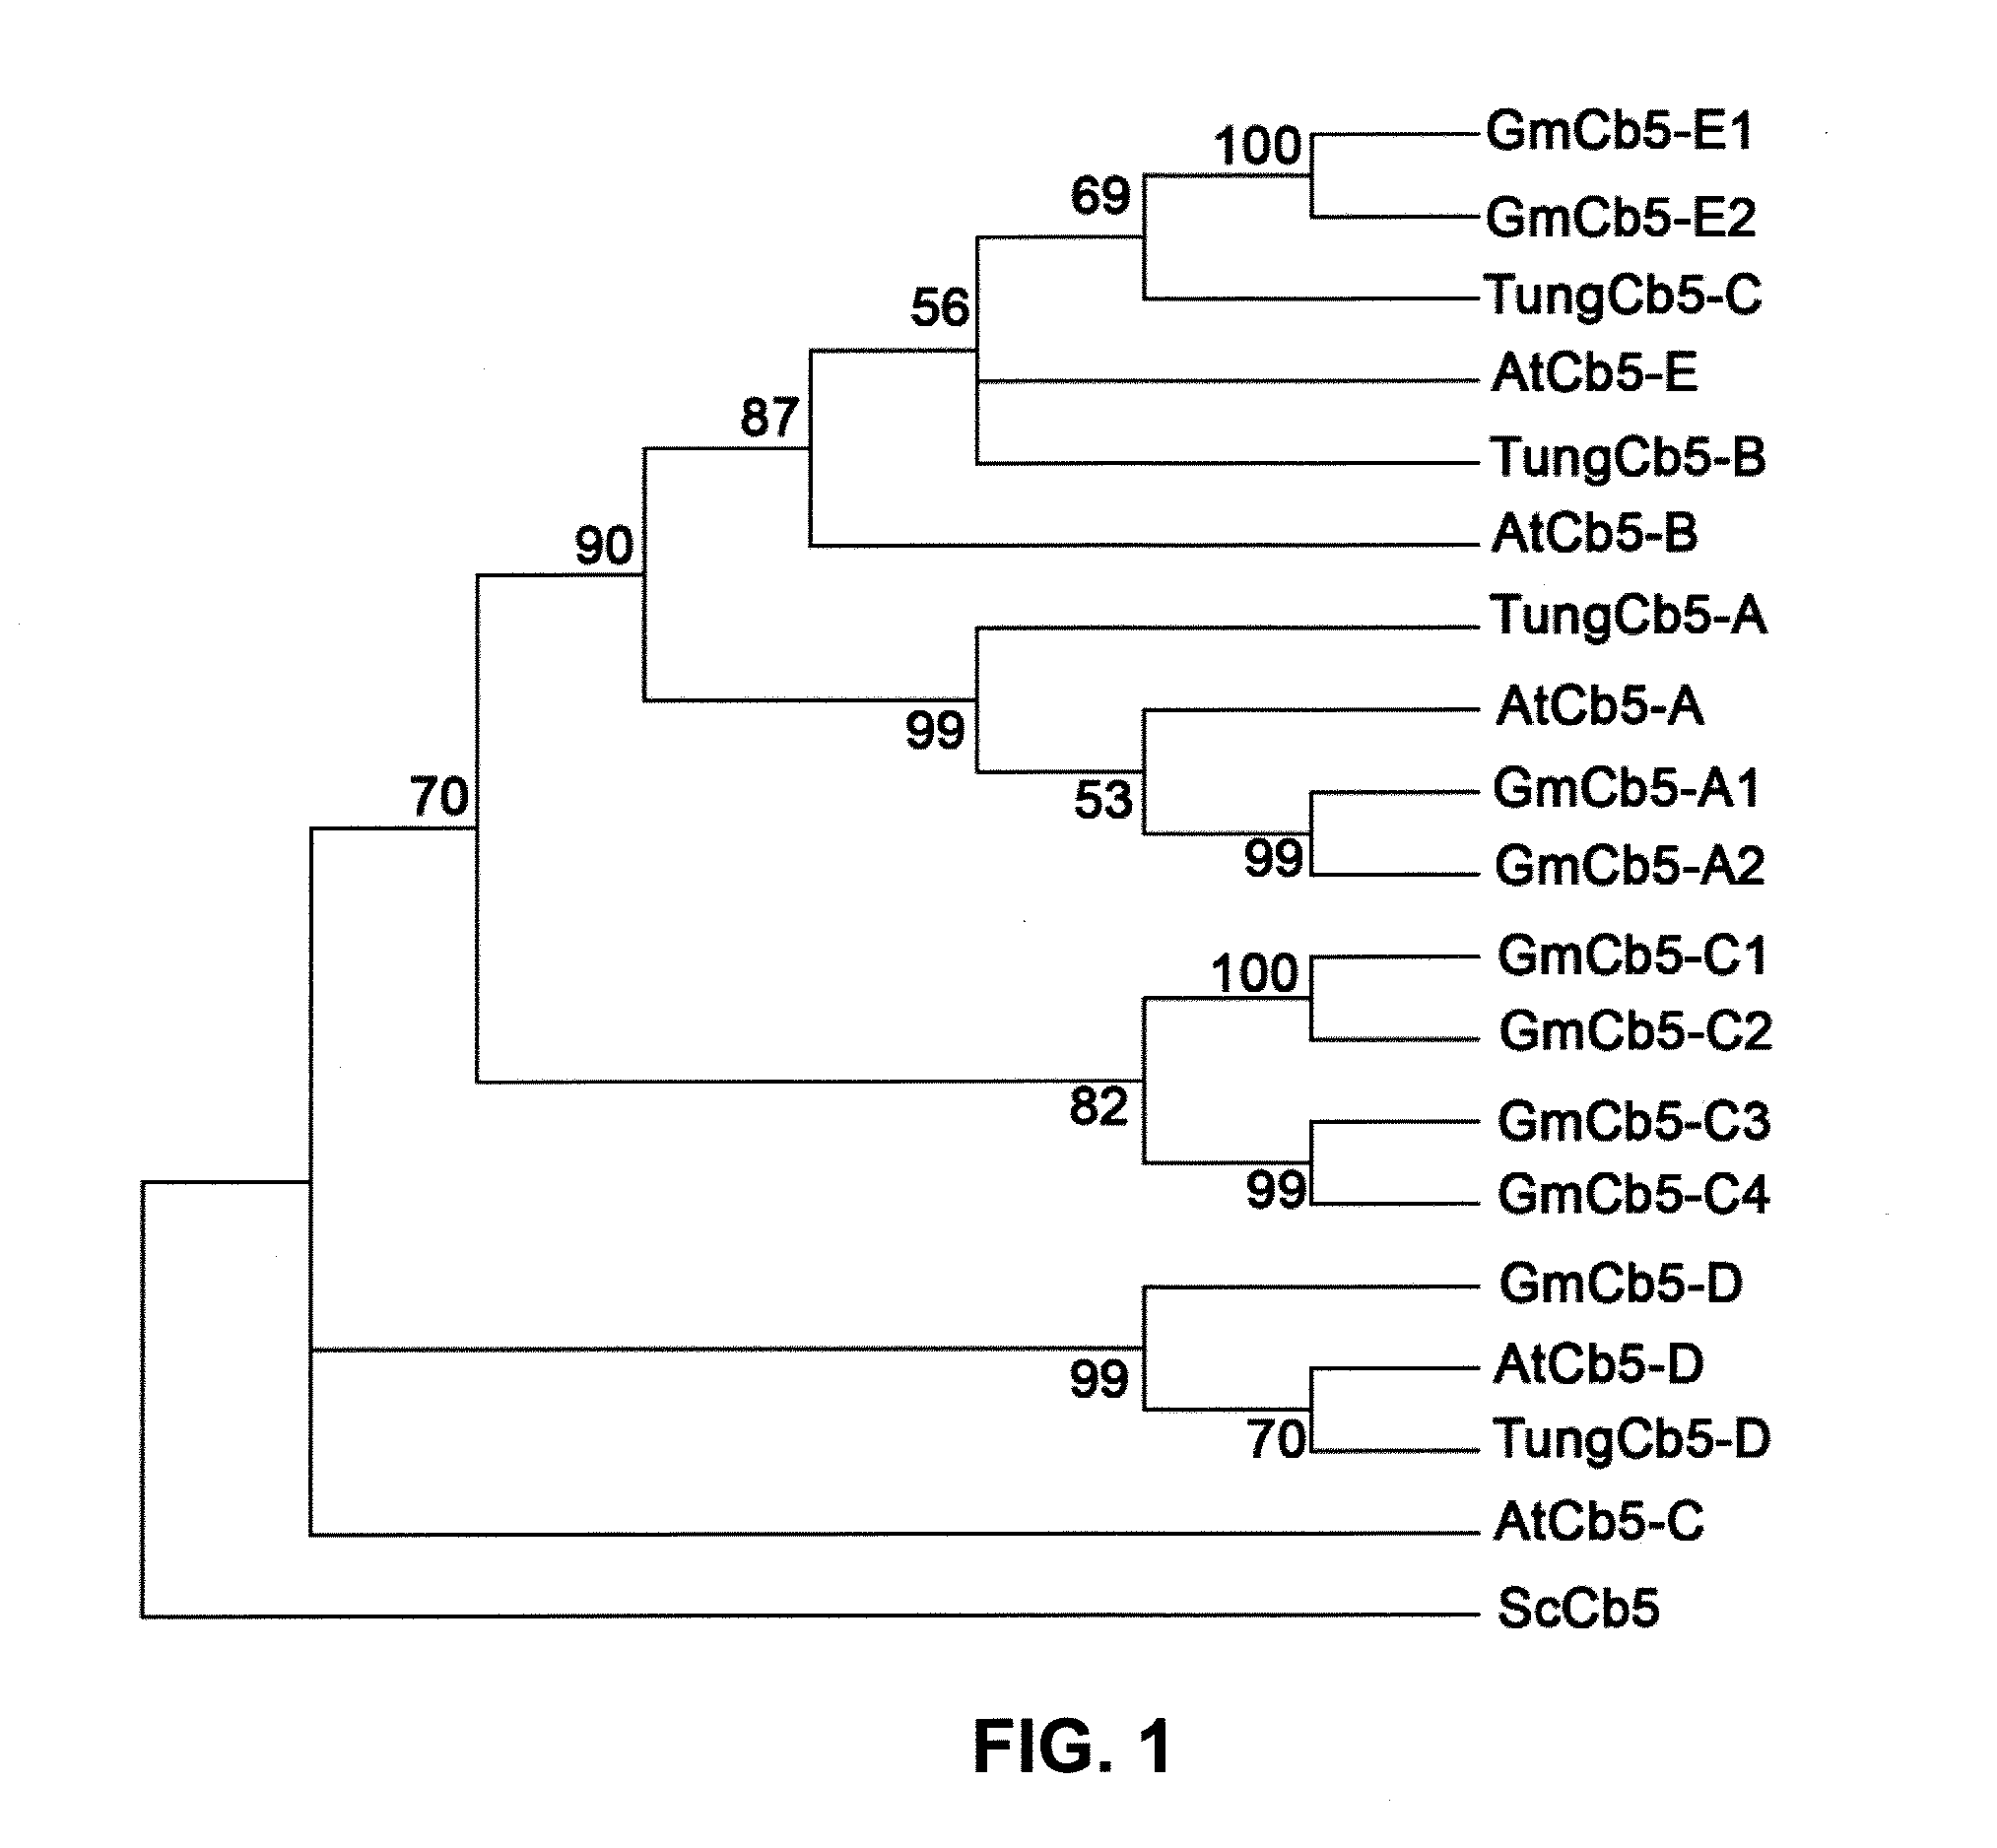 Plant Genes Associated With Seed Oil Content And Methods Of Their Use